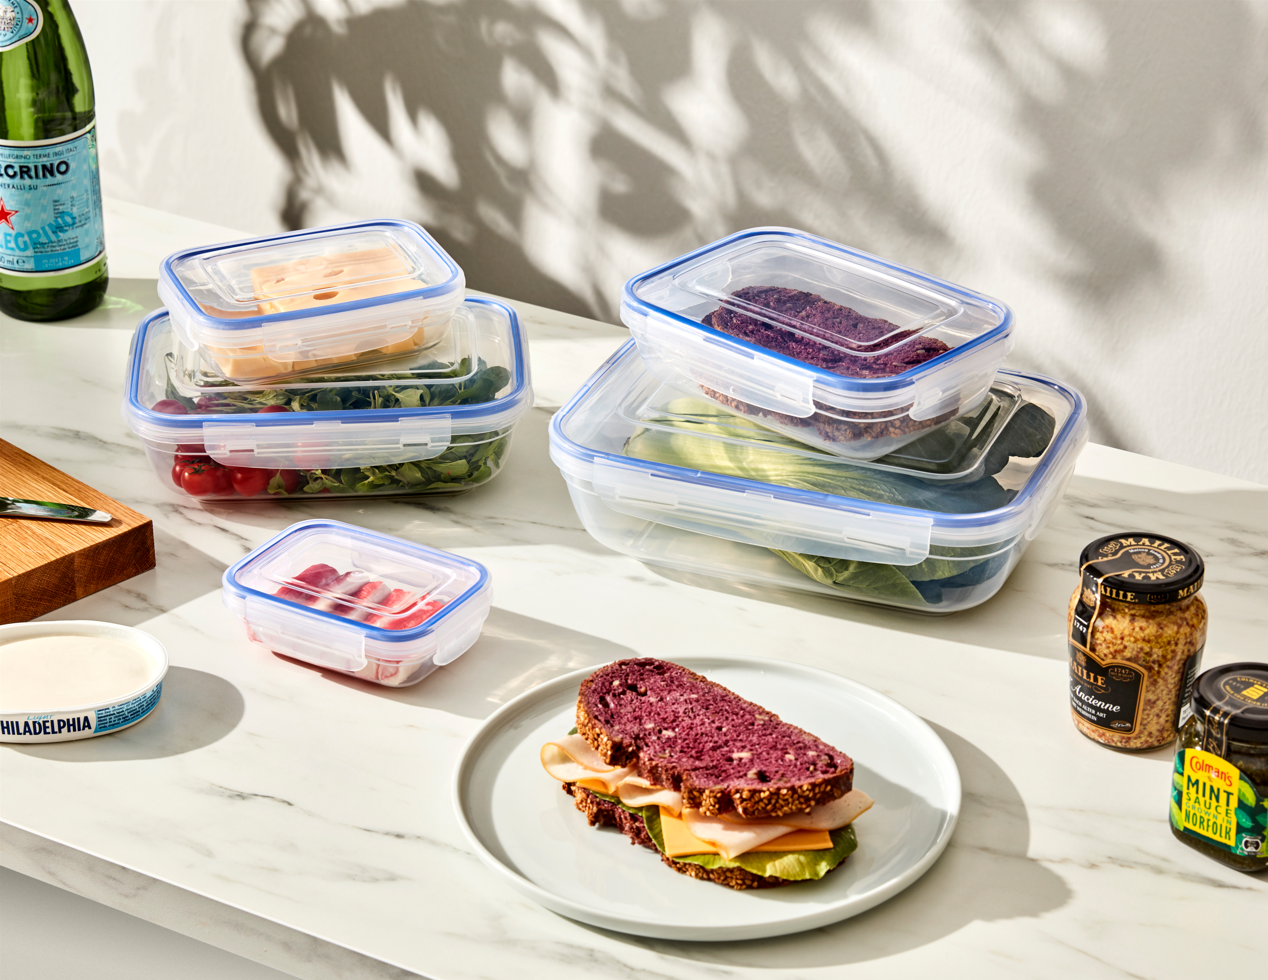 Superio Food Storage Containers, Airtight Leak-Proof Meal Prep Rectangular Containers, 2.5 Qt.